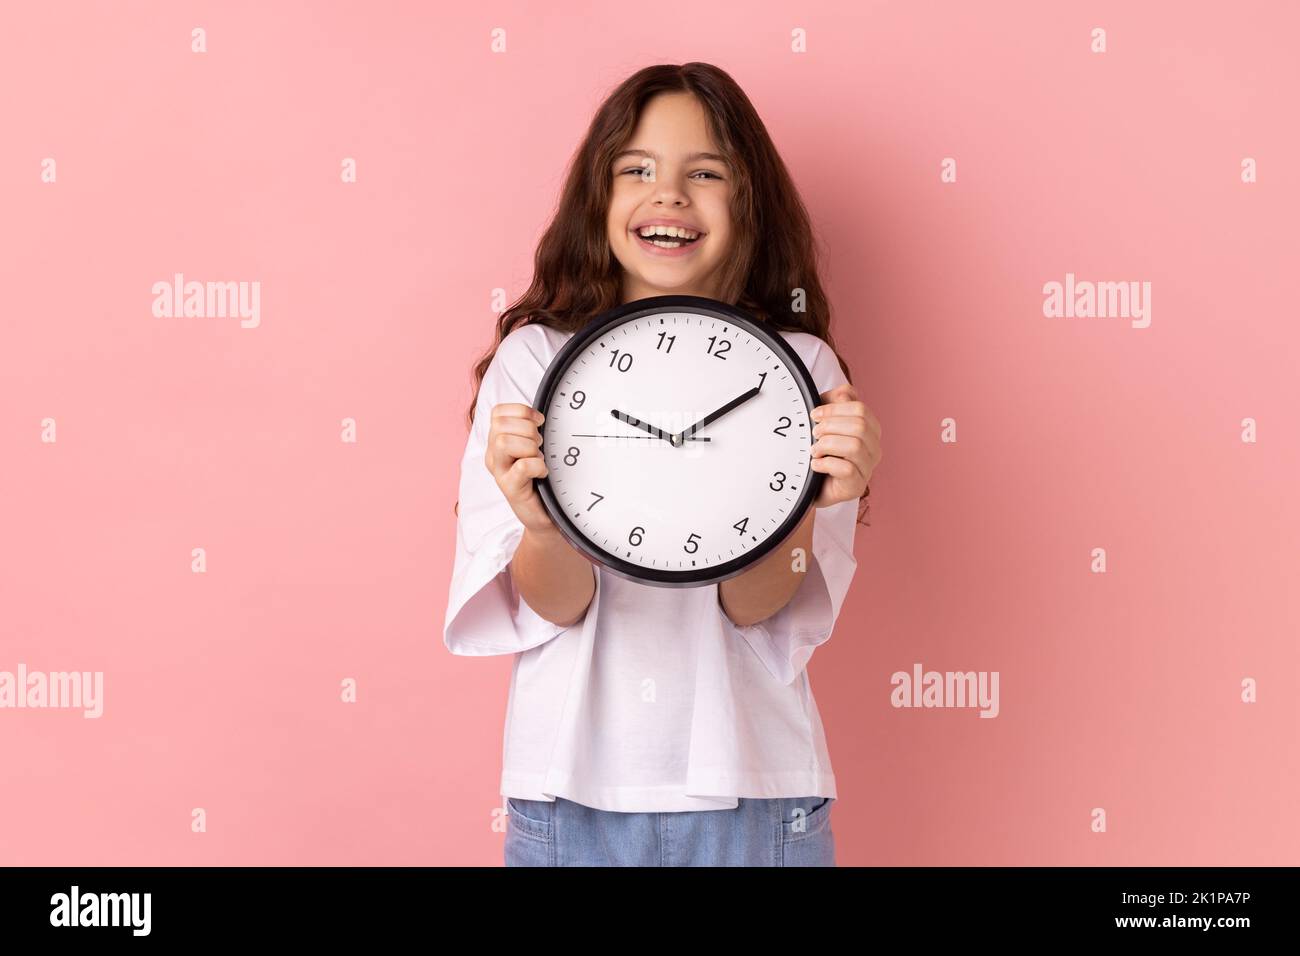 Portrait of smiling delighted little girl wearing white T-shirt holding wall clock, being happy, deadline, satisfied with completed home task. Indoor studio shot isolated on pink background. Stock Photo